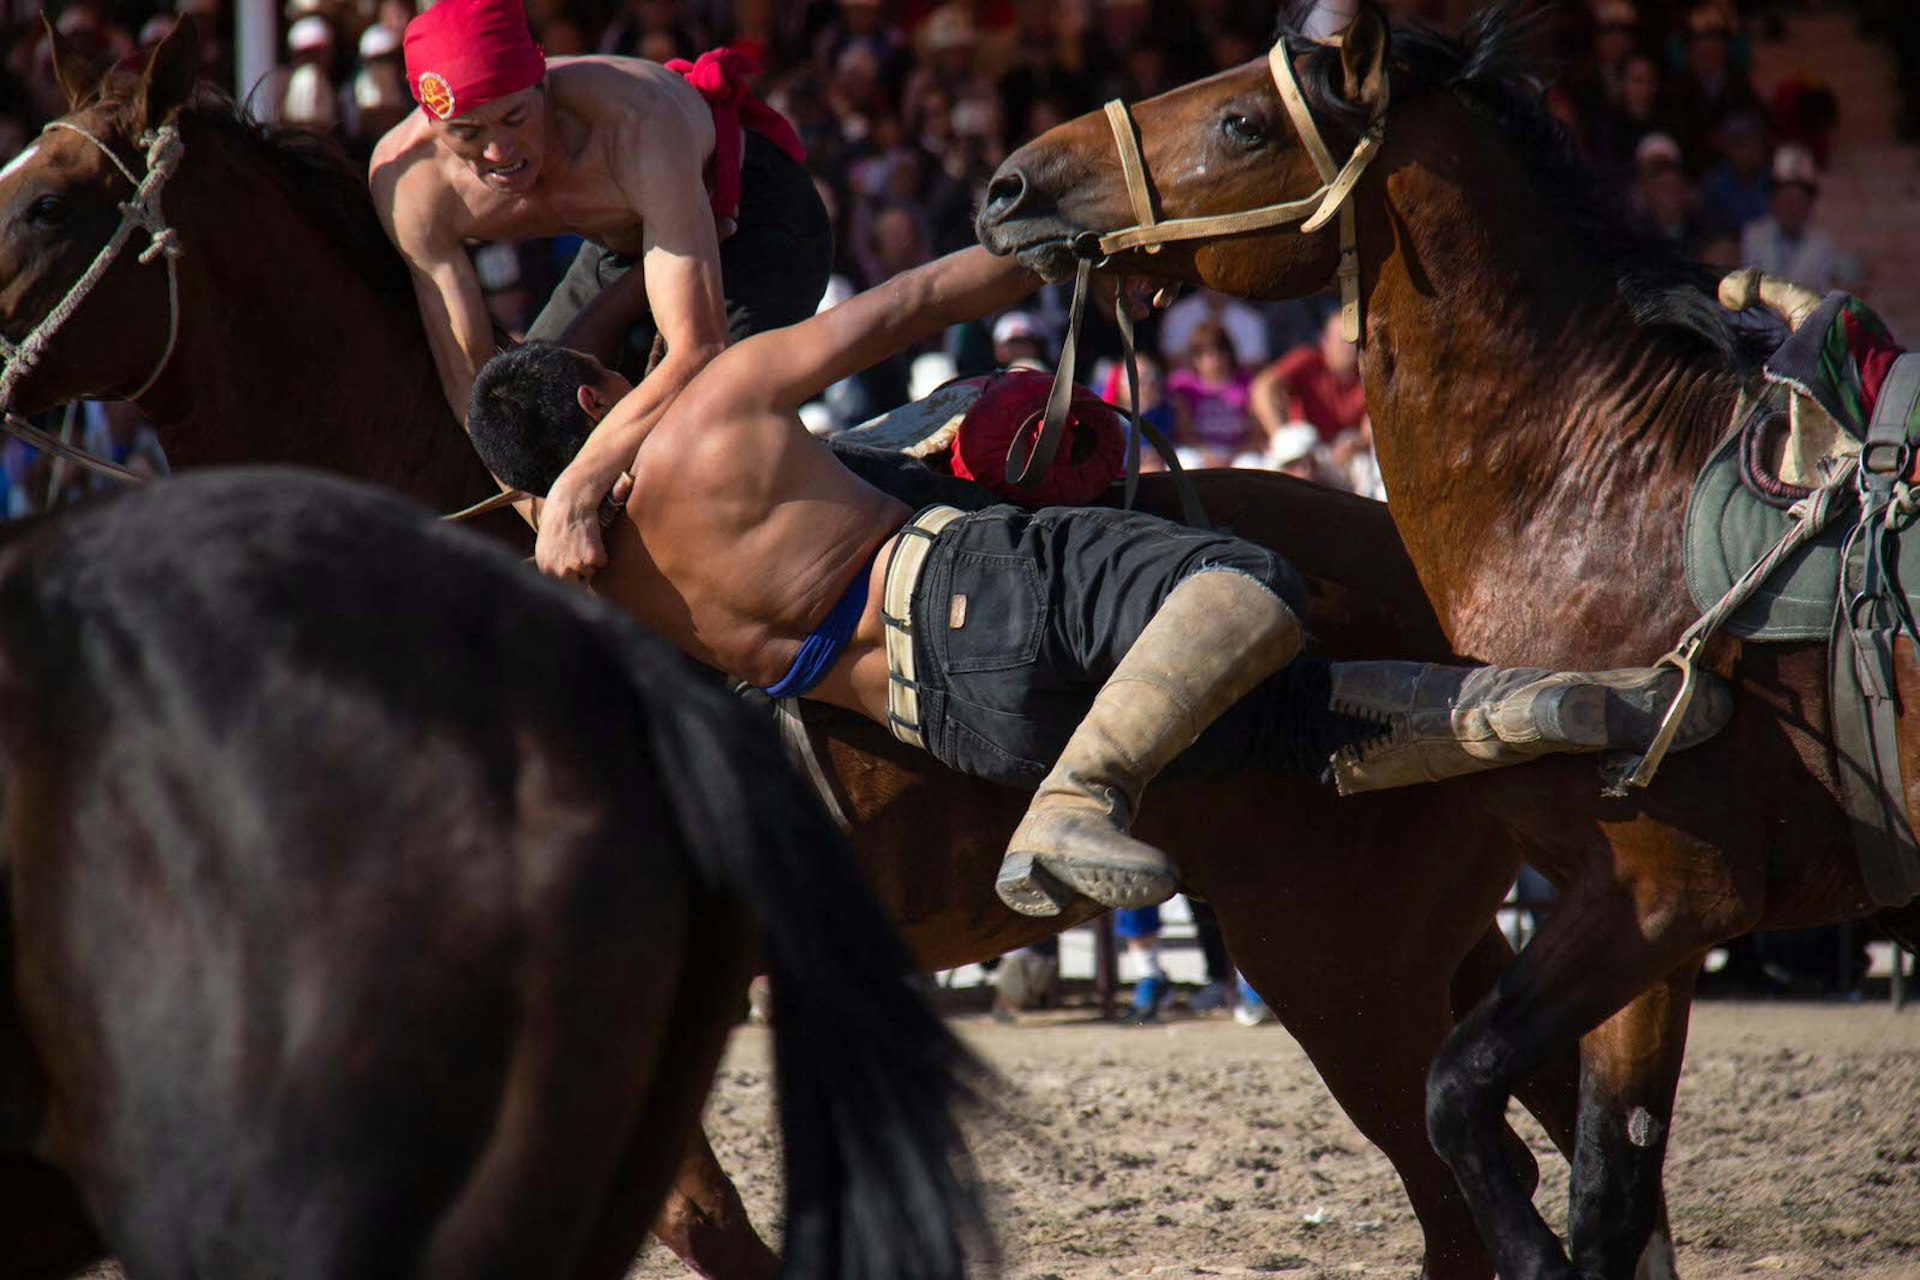 Horse wrestling riders compete during Er Enish competitions at the 2014 World Nomad Games in Kyrgyzstan © Stephen Lioy / Lonely Planet